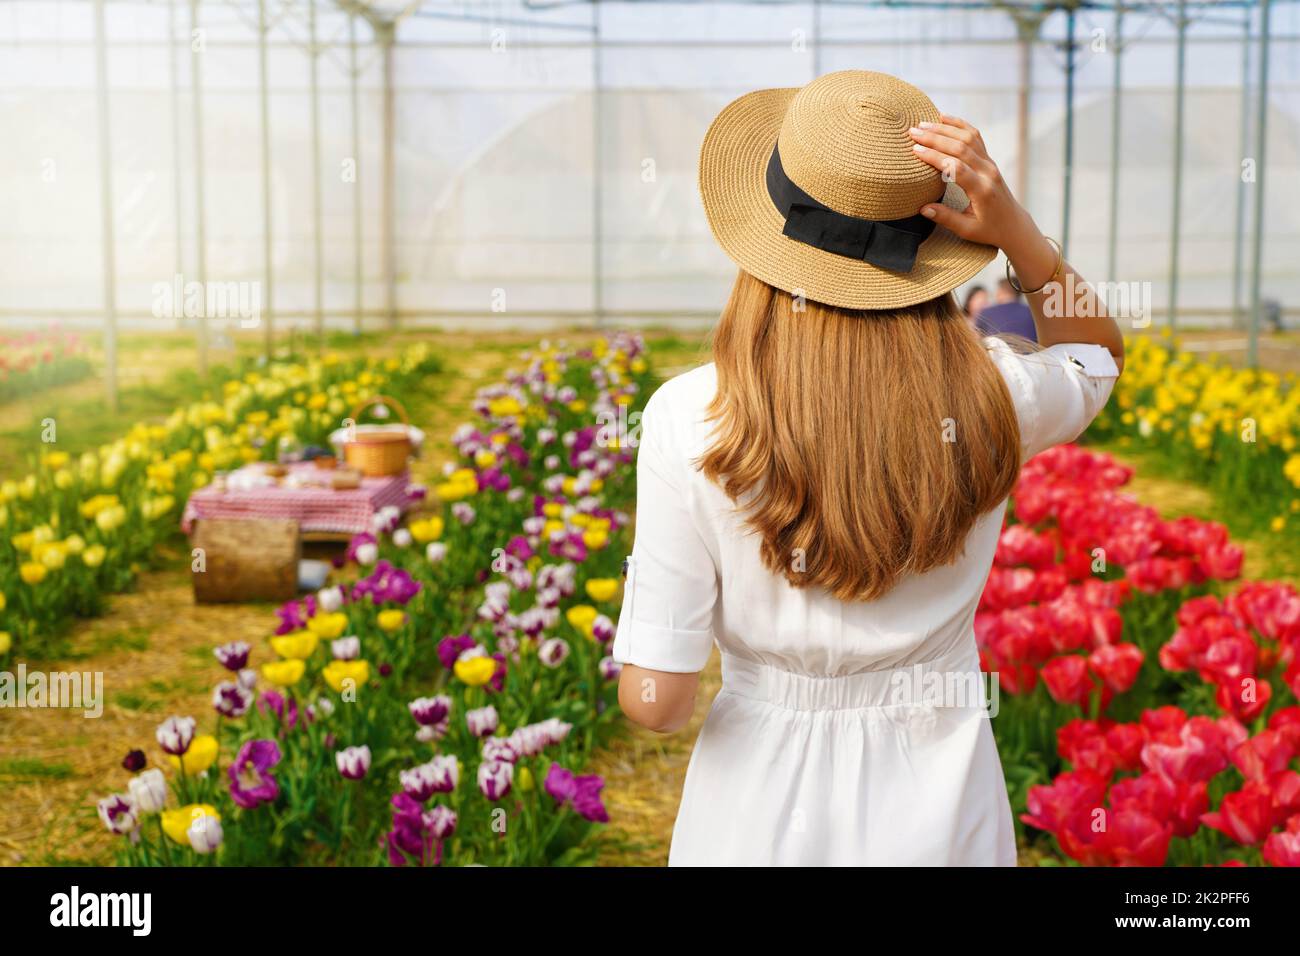 Beautiful girl holds straw hat walking between flowers ready for picnic on sunset. Back view. Stock Photo